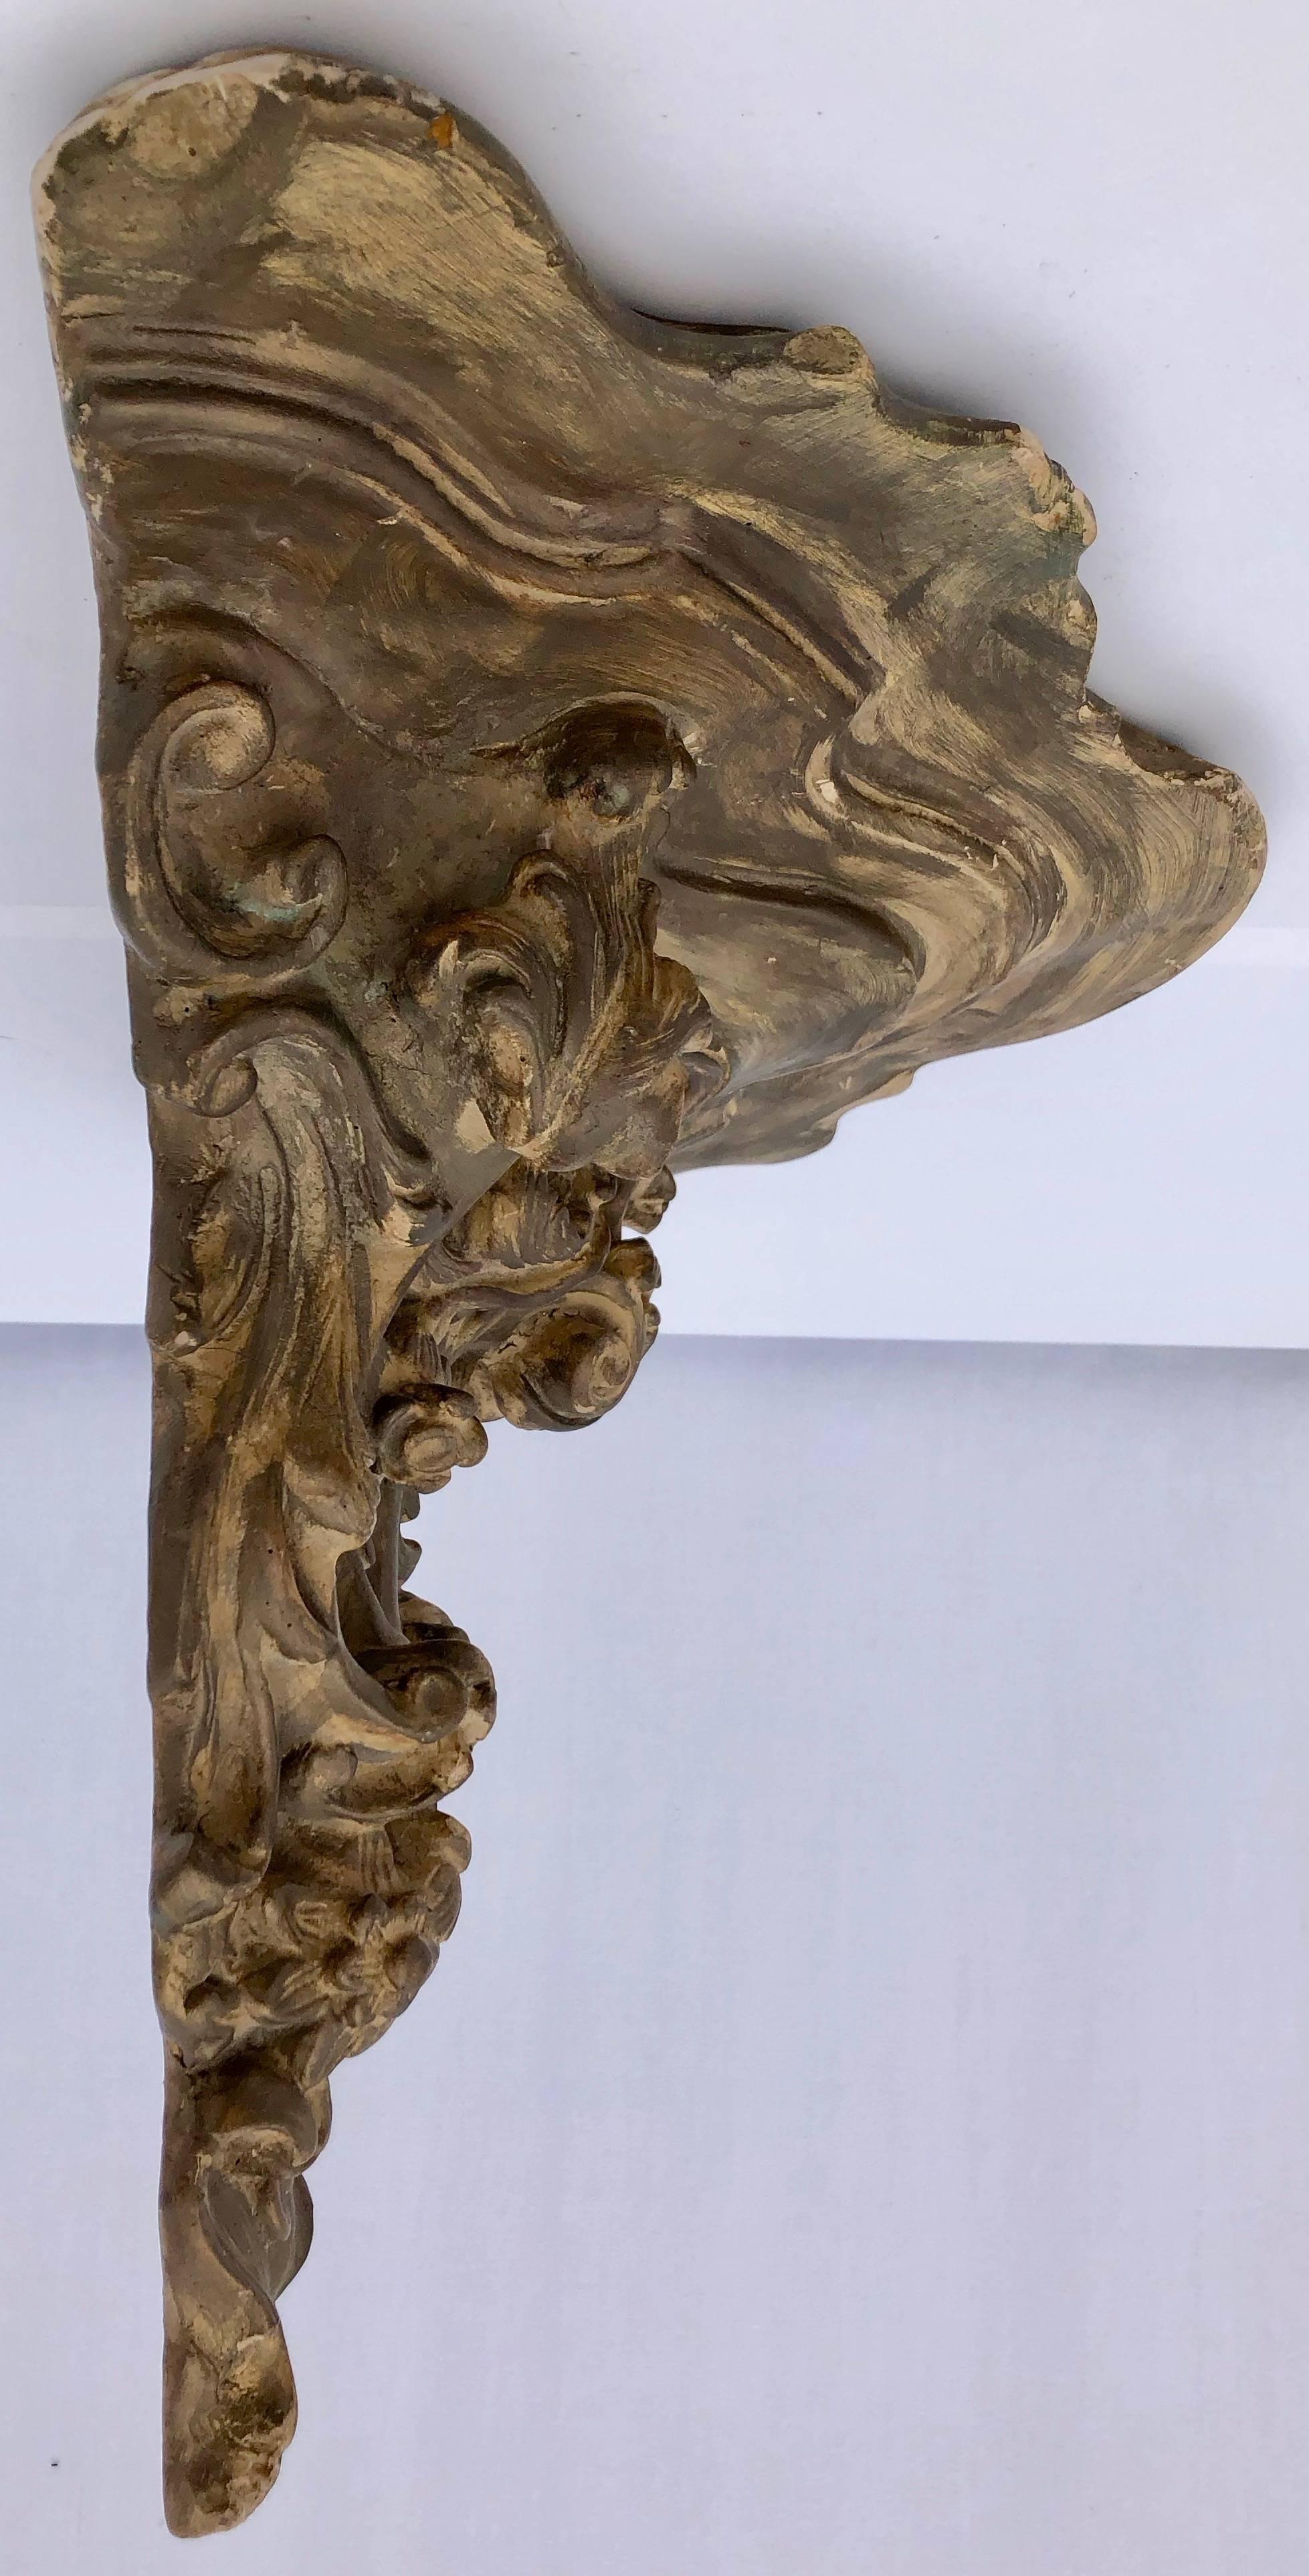 20th Century French Wall Sconce in Terra Cotta with Floral and Scroll Design, Mid-1900s For Sale